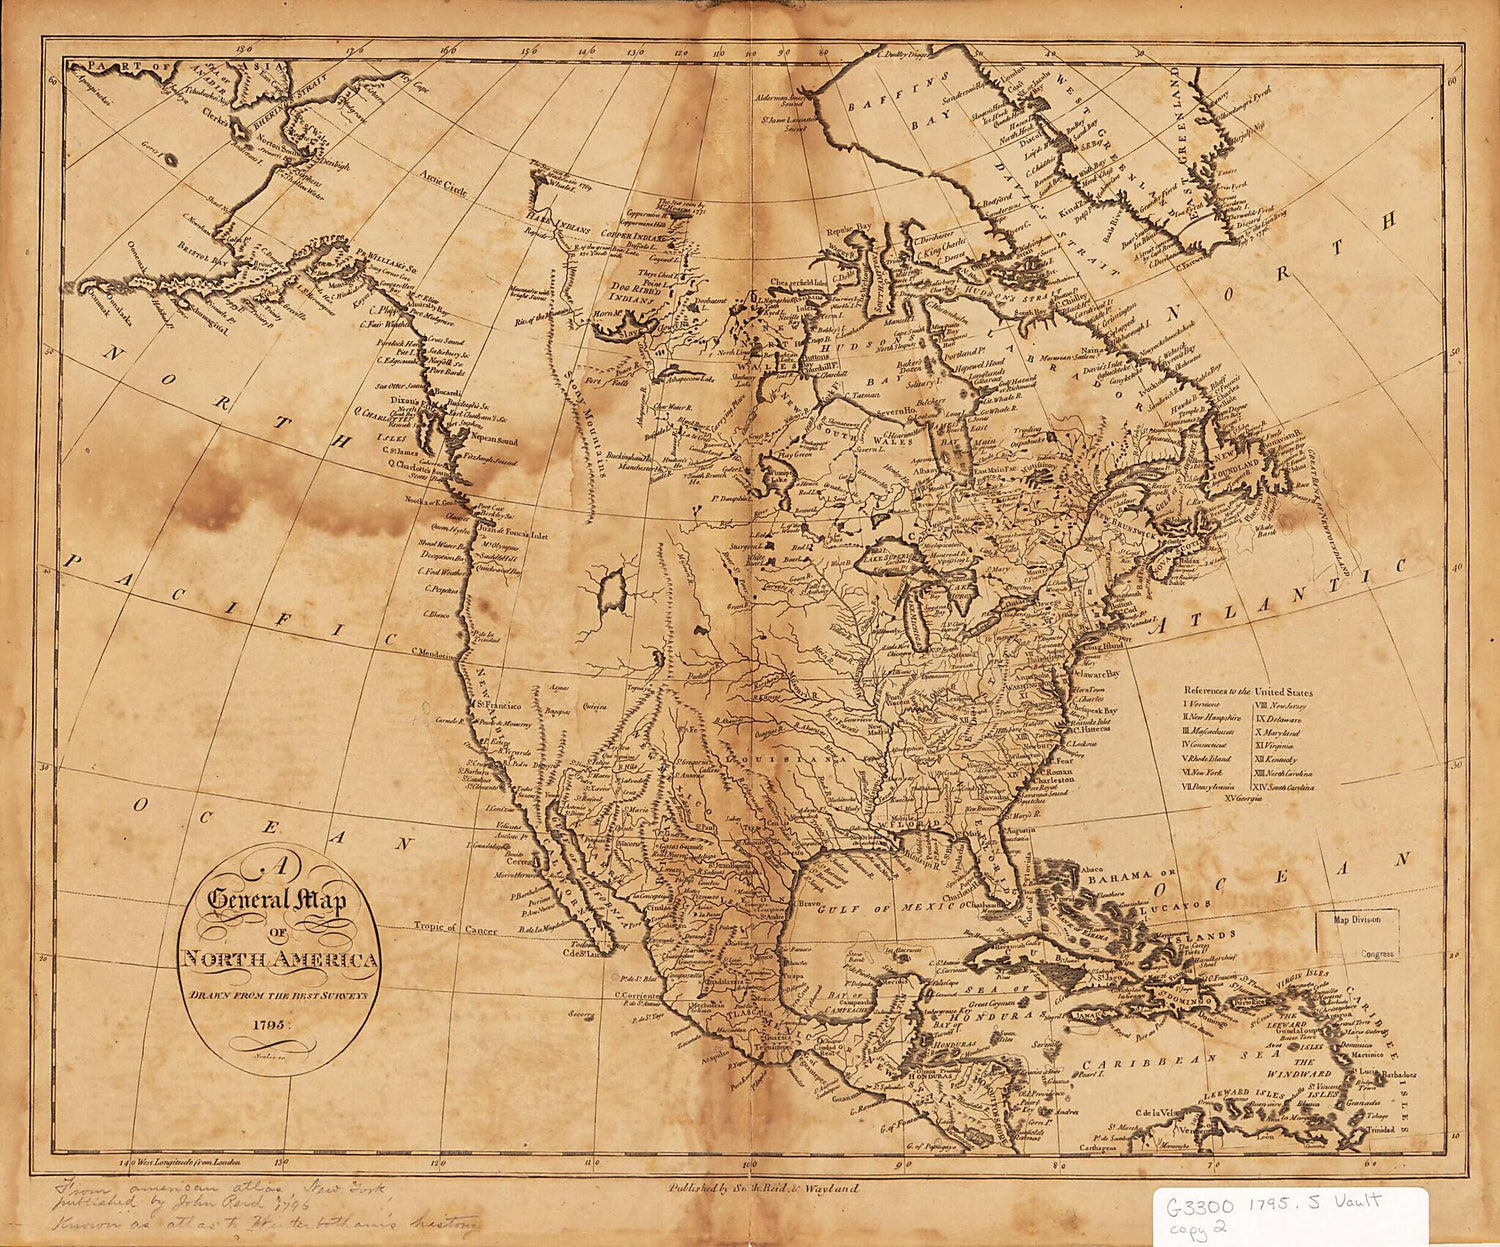 This old map of A General Map of North America Drawn from the Best Surveys from 1795 was created by John Scoles, Reid &amp; Wayland Smith, William Winterbotham in 1795